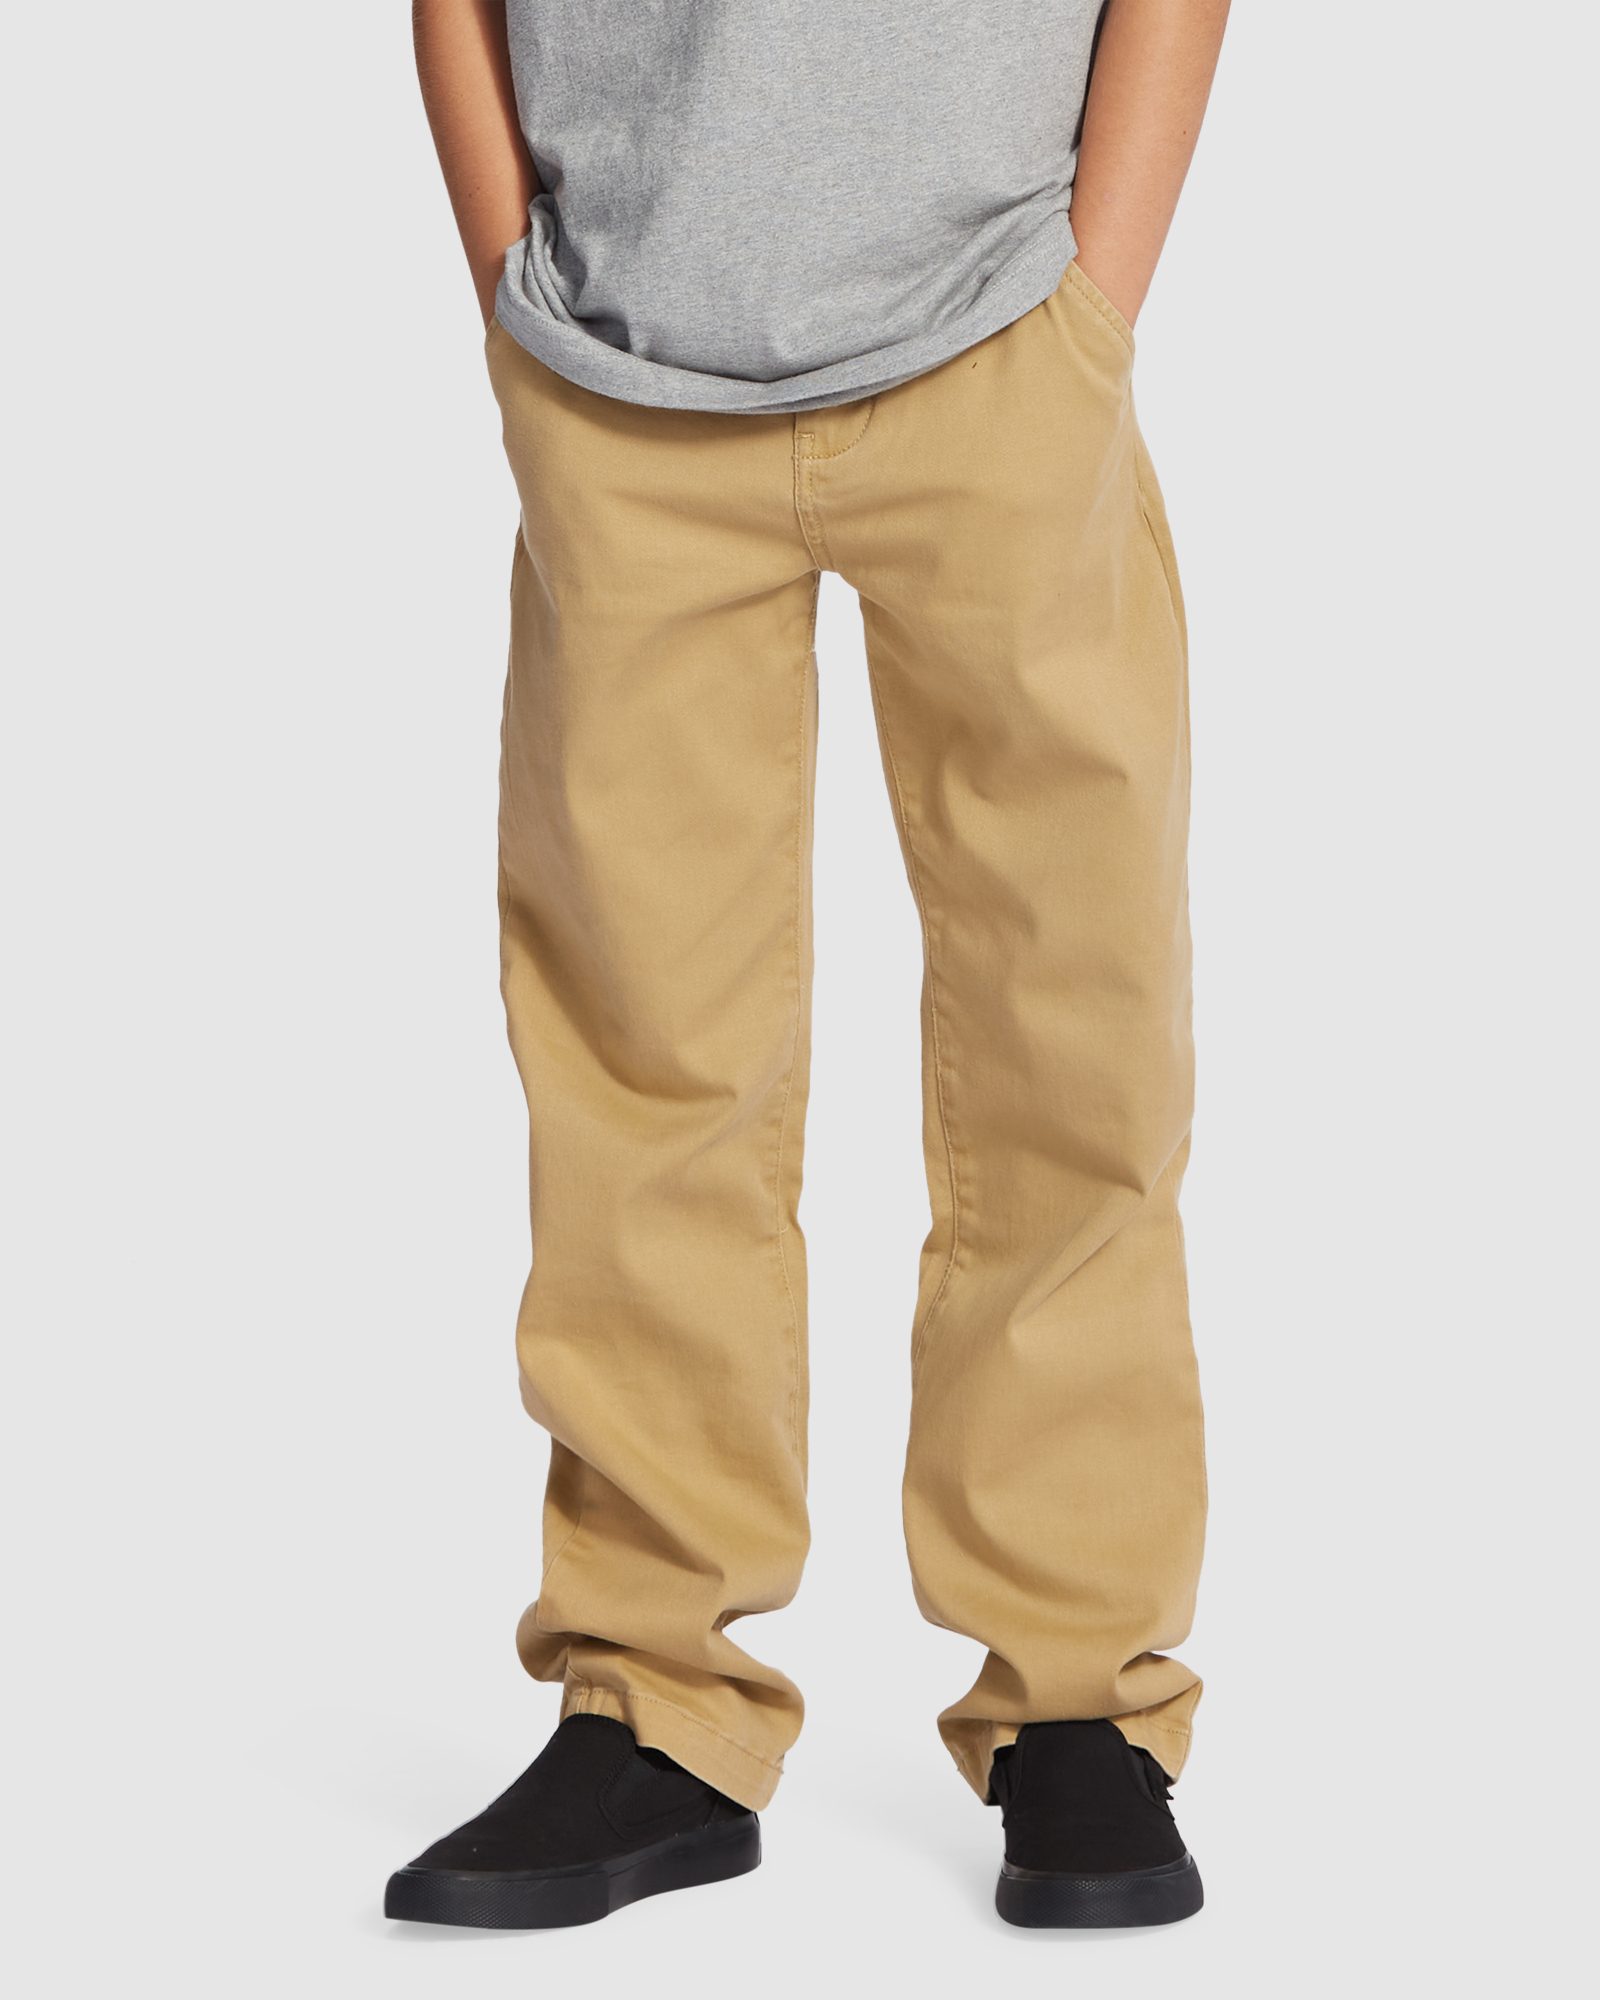 Dc Shoes Youth Worker Relaxed Chino Pant - Incense | SurfStitch